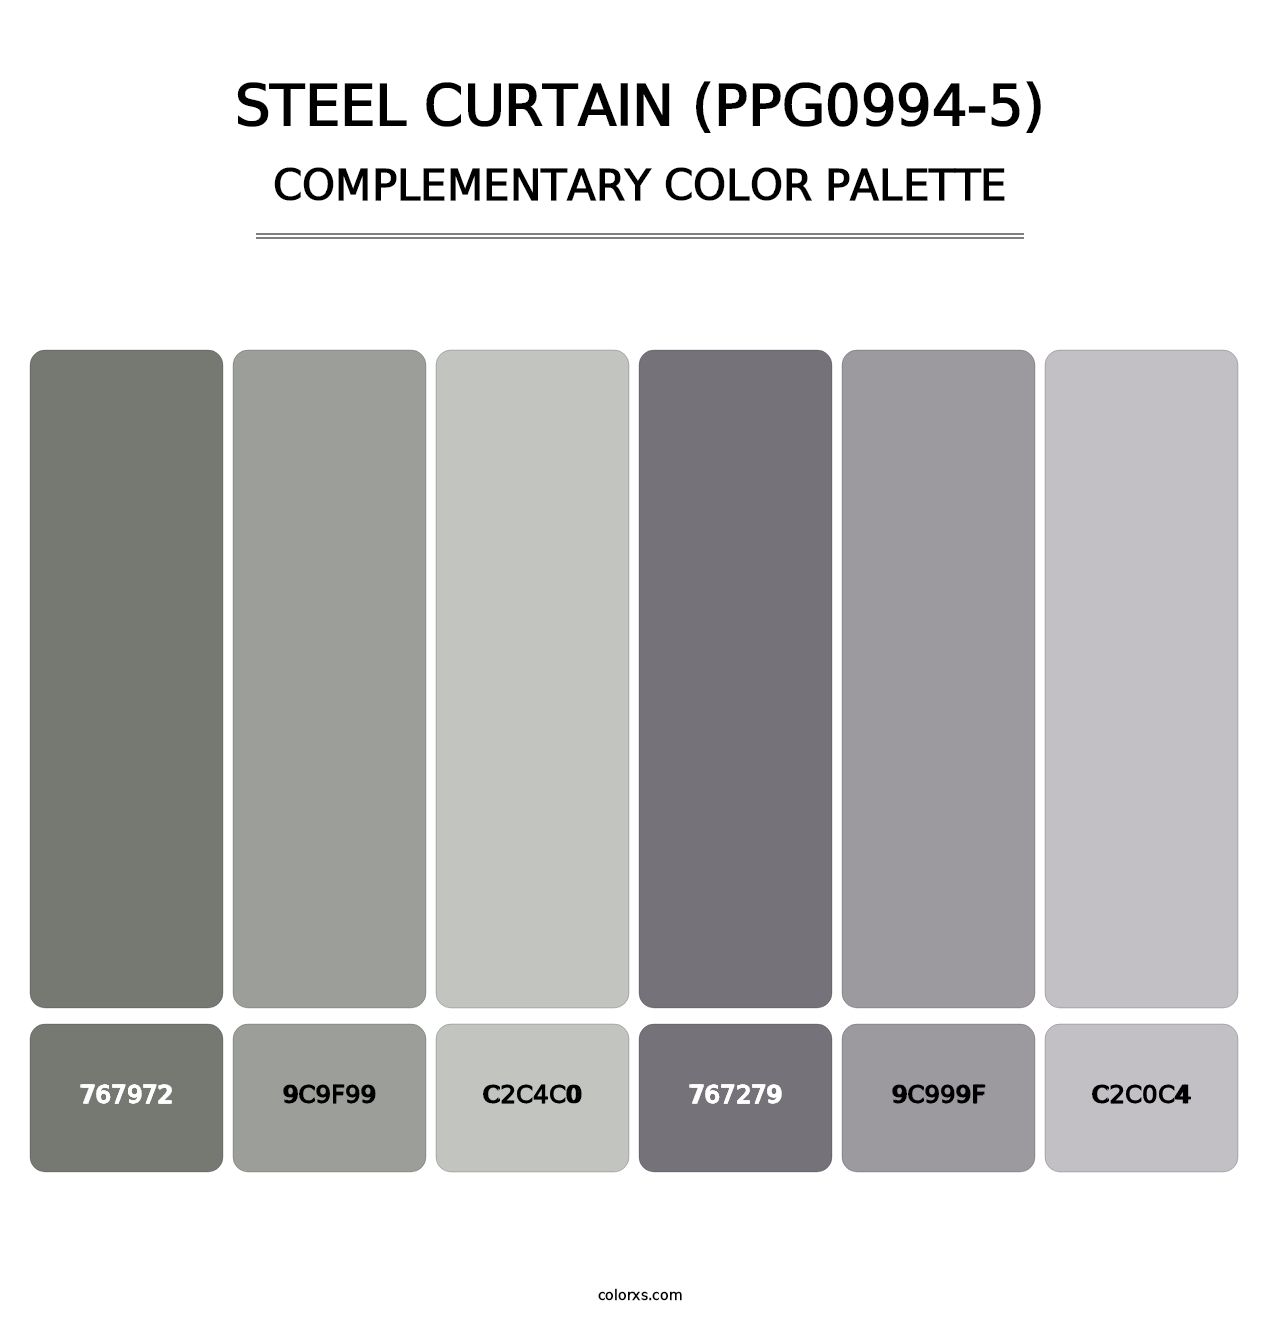 Steel Curtain (PPG0994-5) - Complementary Color Palette